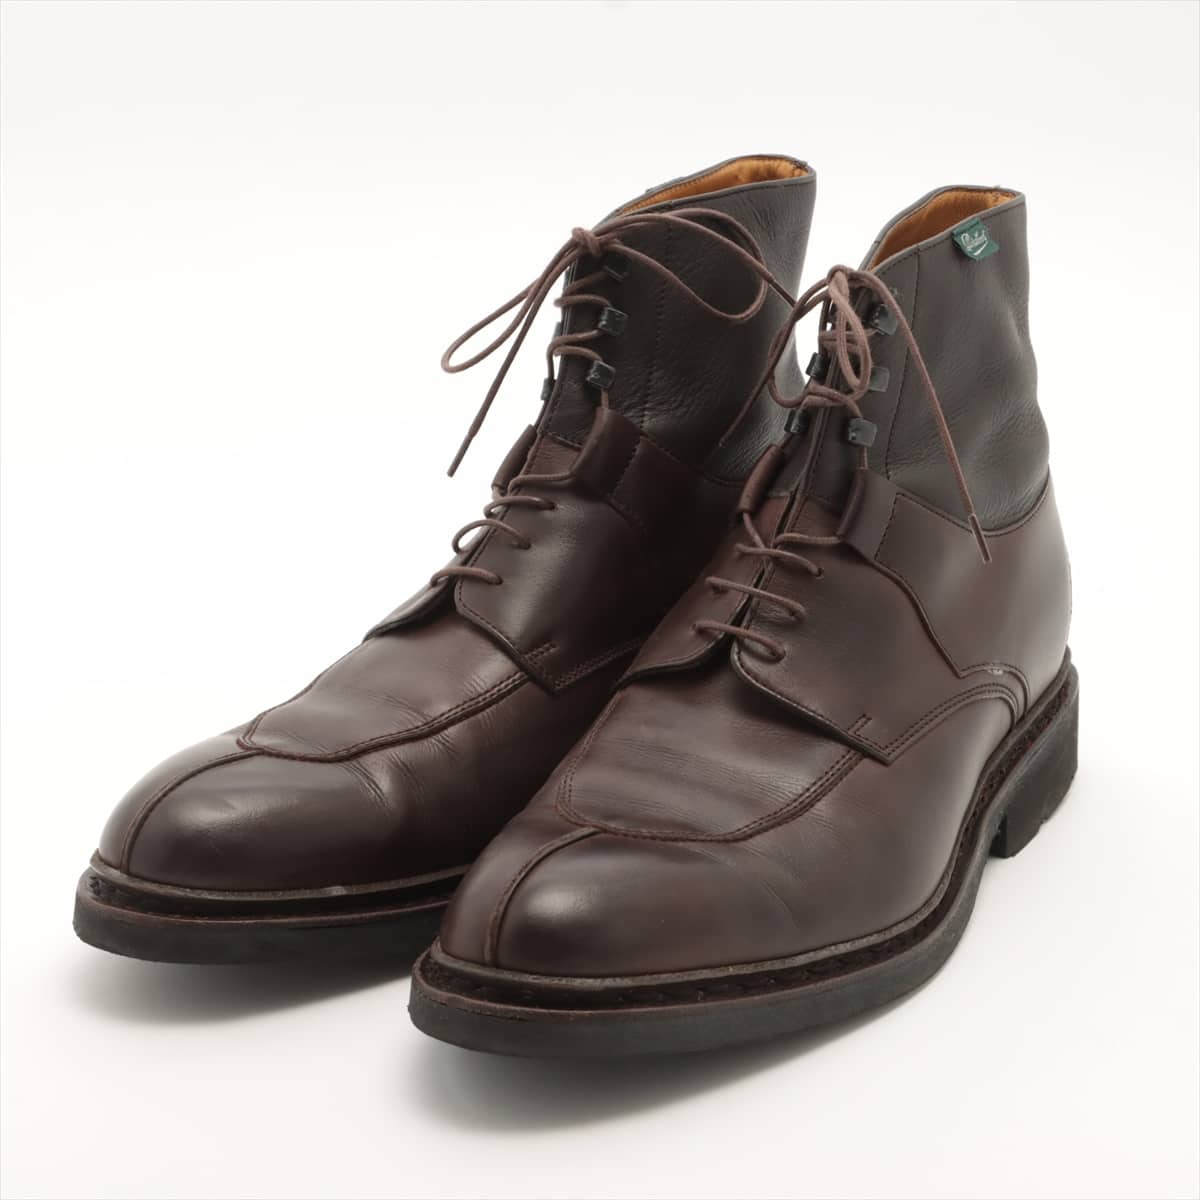 Paraboot Leather Boots 7 1/2 Men's Brown BEAUMONT/GALAXY 117083